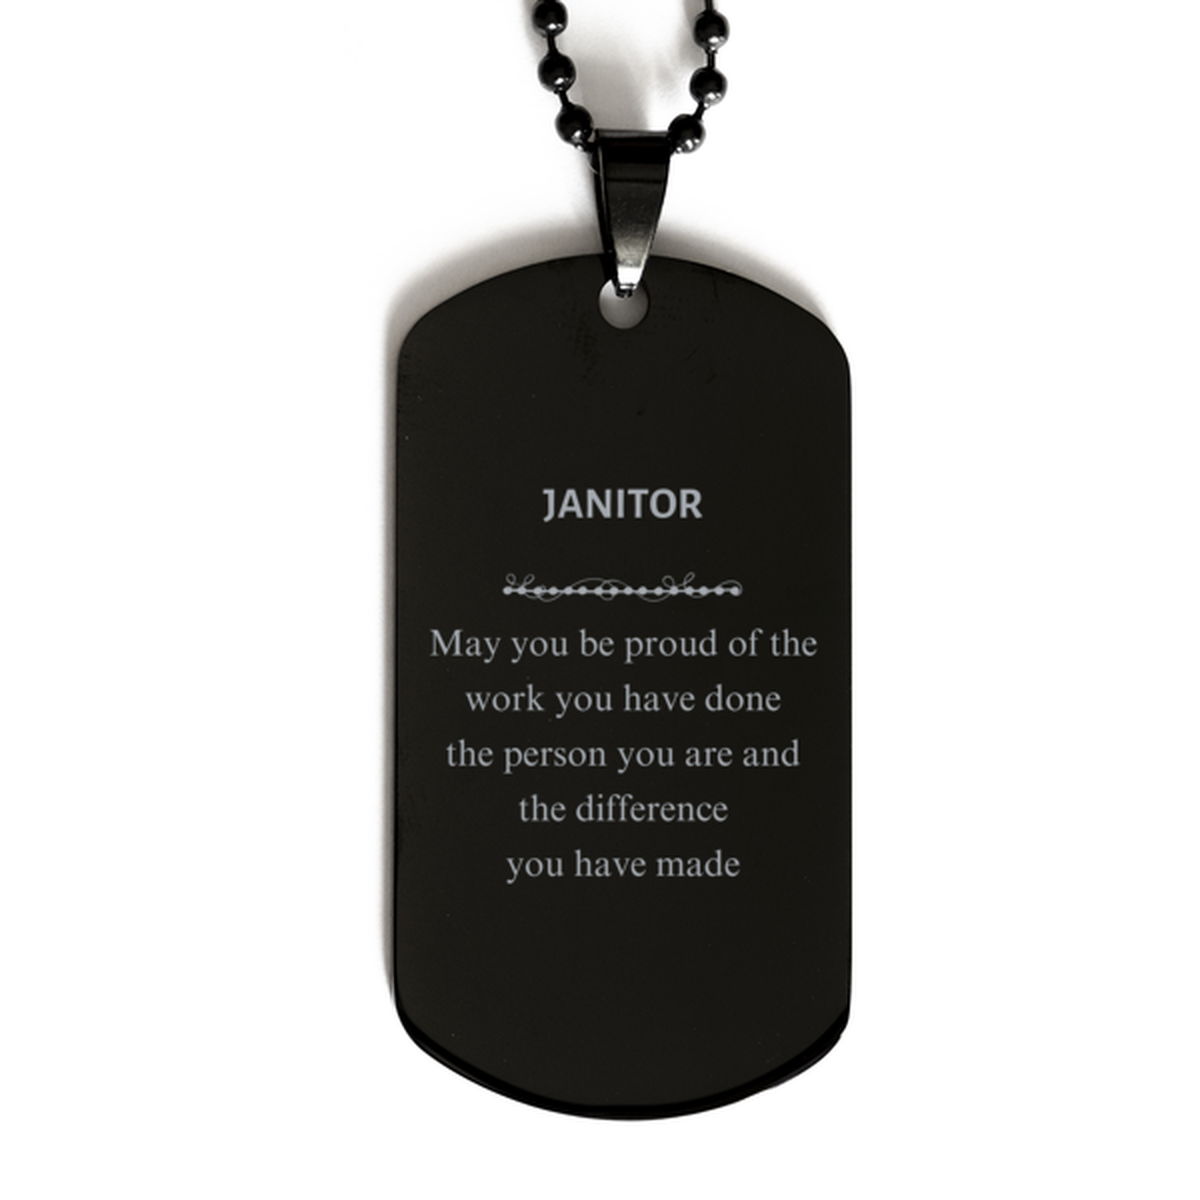 Janitor May you be proud of the work you have done, Retirement Janitor Black Dog Tag for Colleague Appreciation Gifts Amazing for Janitor